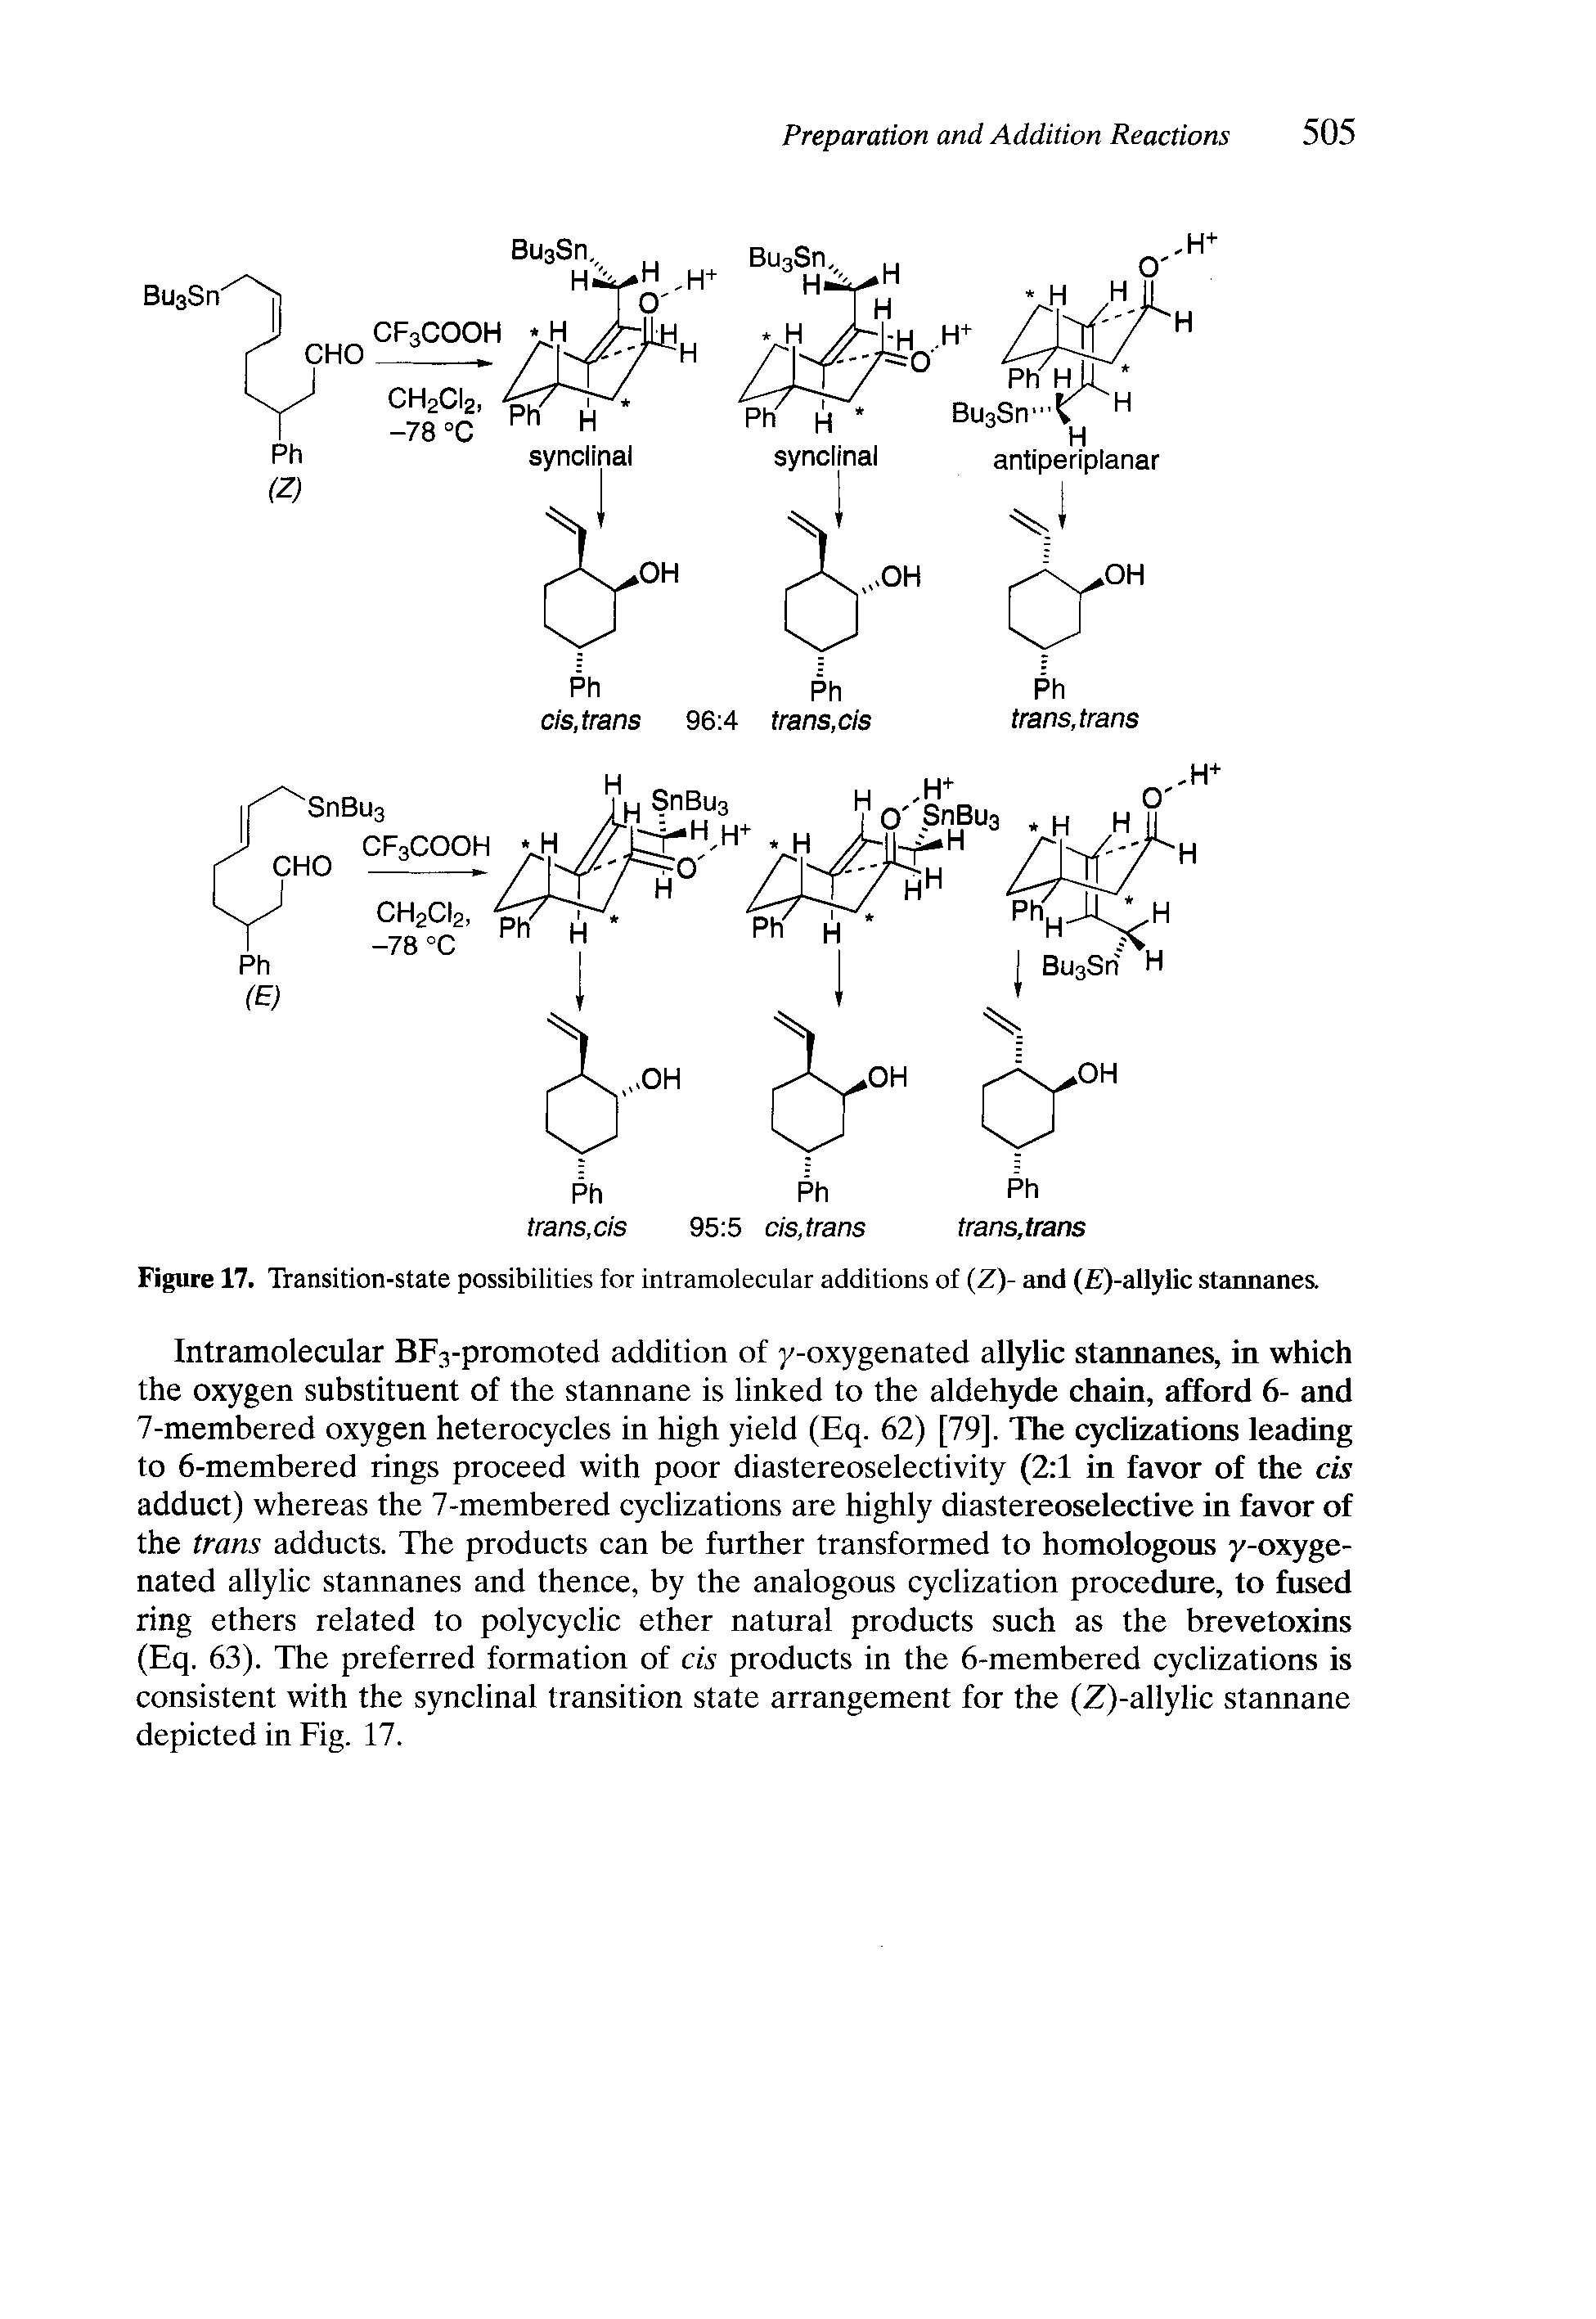 Figure 17. Transition-state possibilities for intramolecular additions of (Z)- and ( )-allylic stannanes.